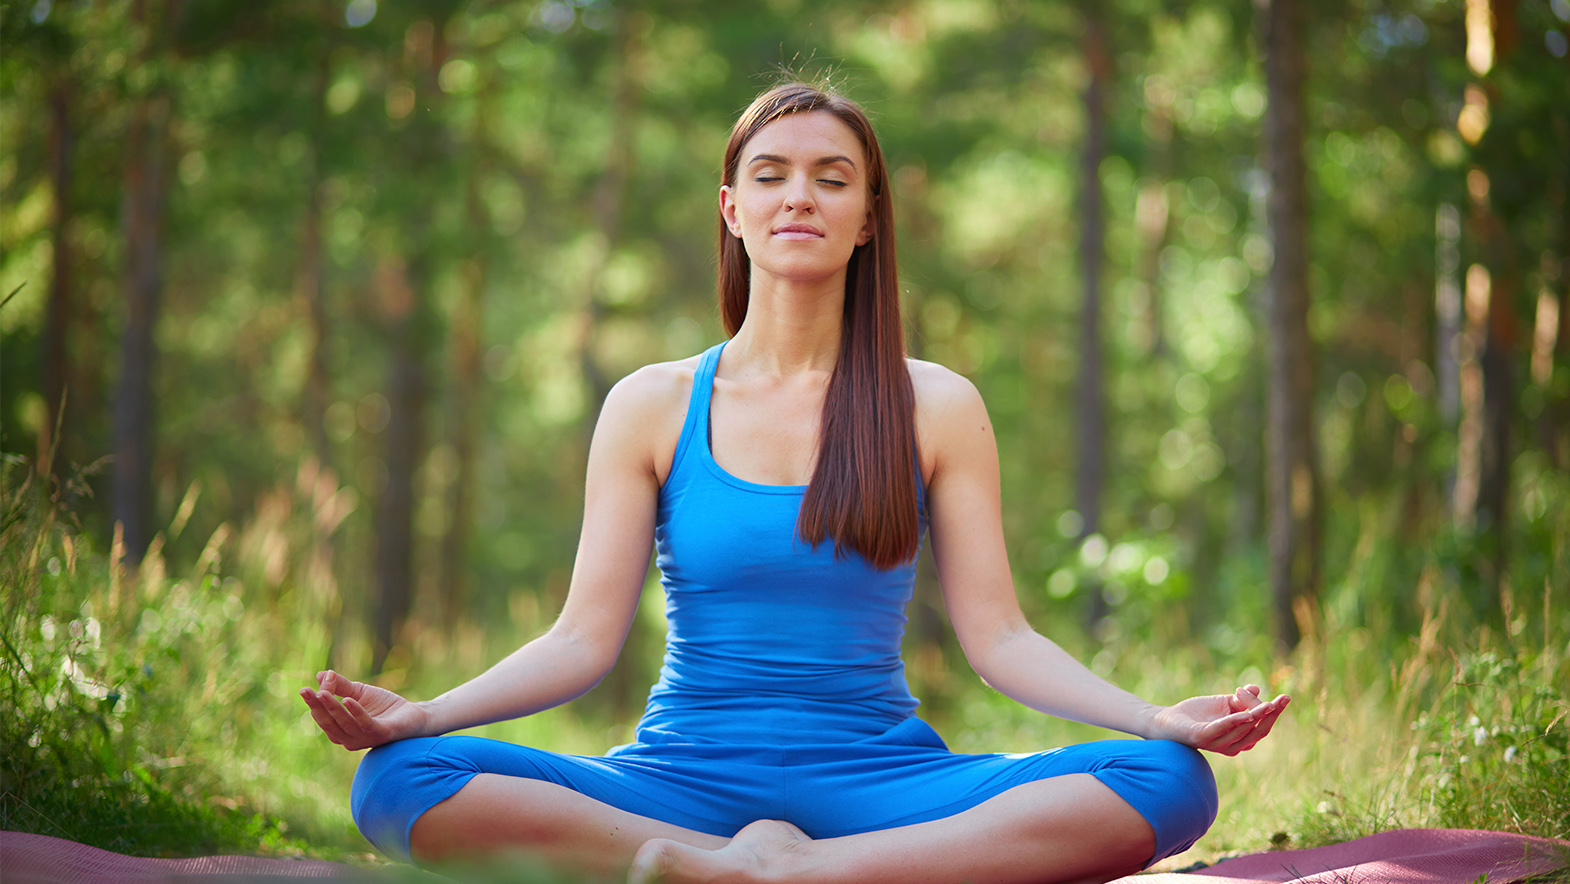 Padmasana Benefits: The Lotus Pose Is More Than Just A Stretch